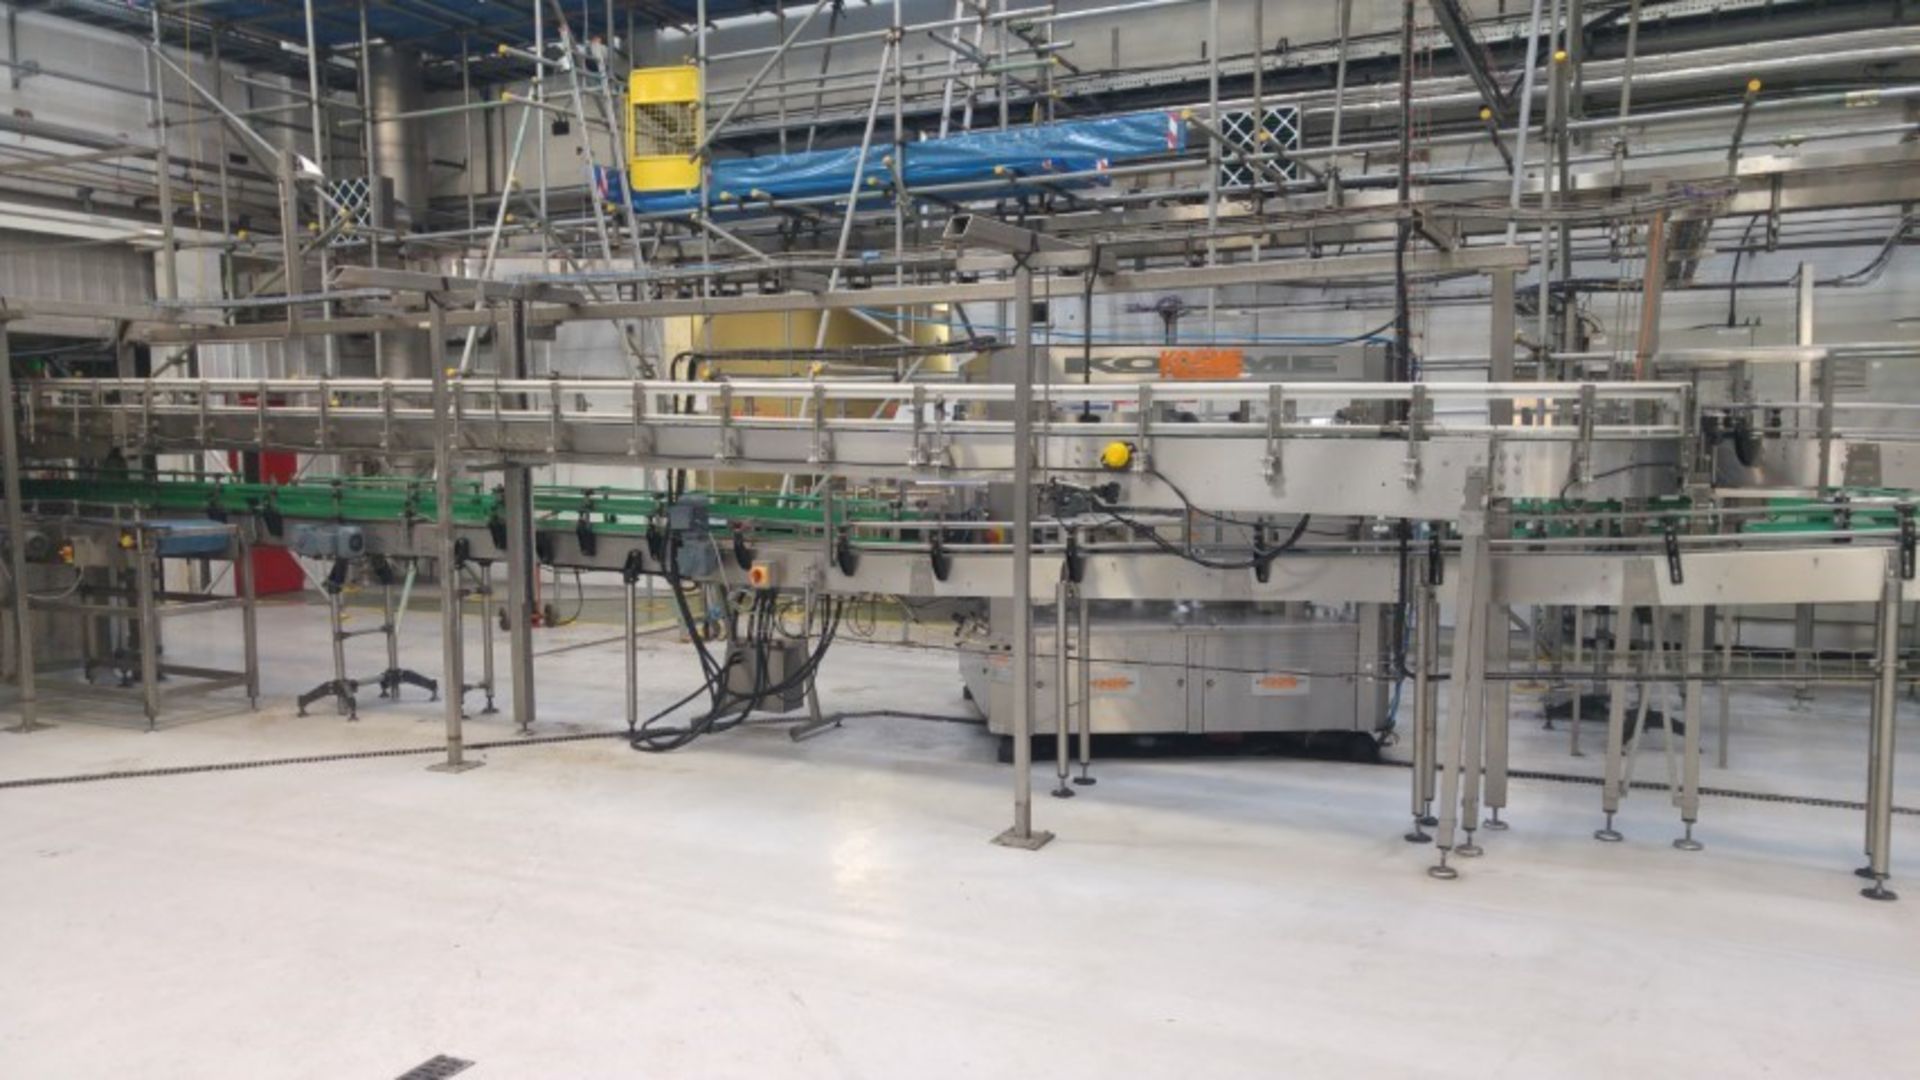 The Dismantled and stored PET bottling line (VIEWING HIGHLY RECOMMENDED) - Image 4 of 7